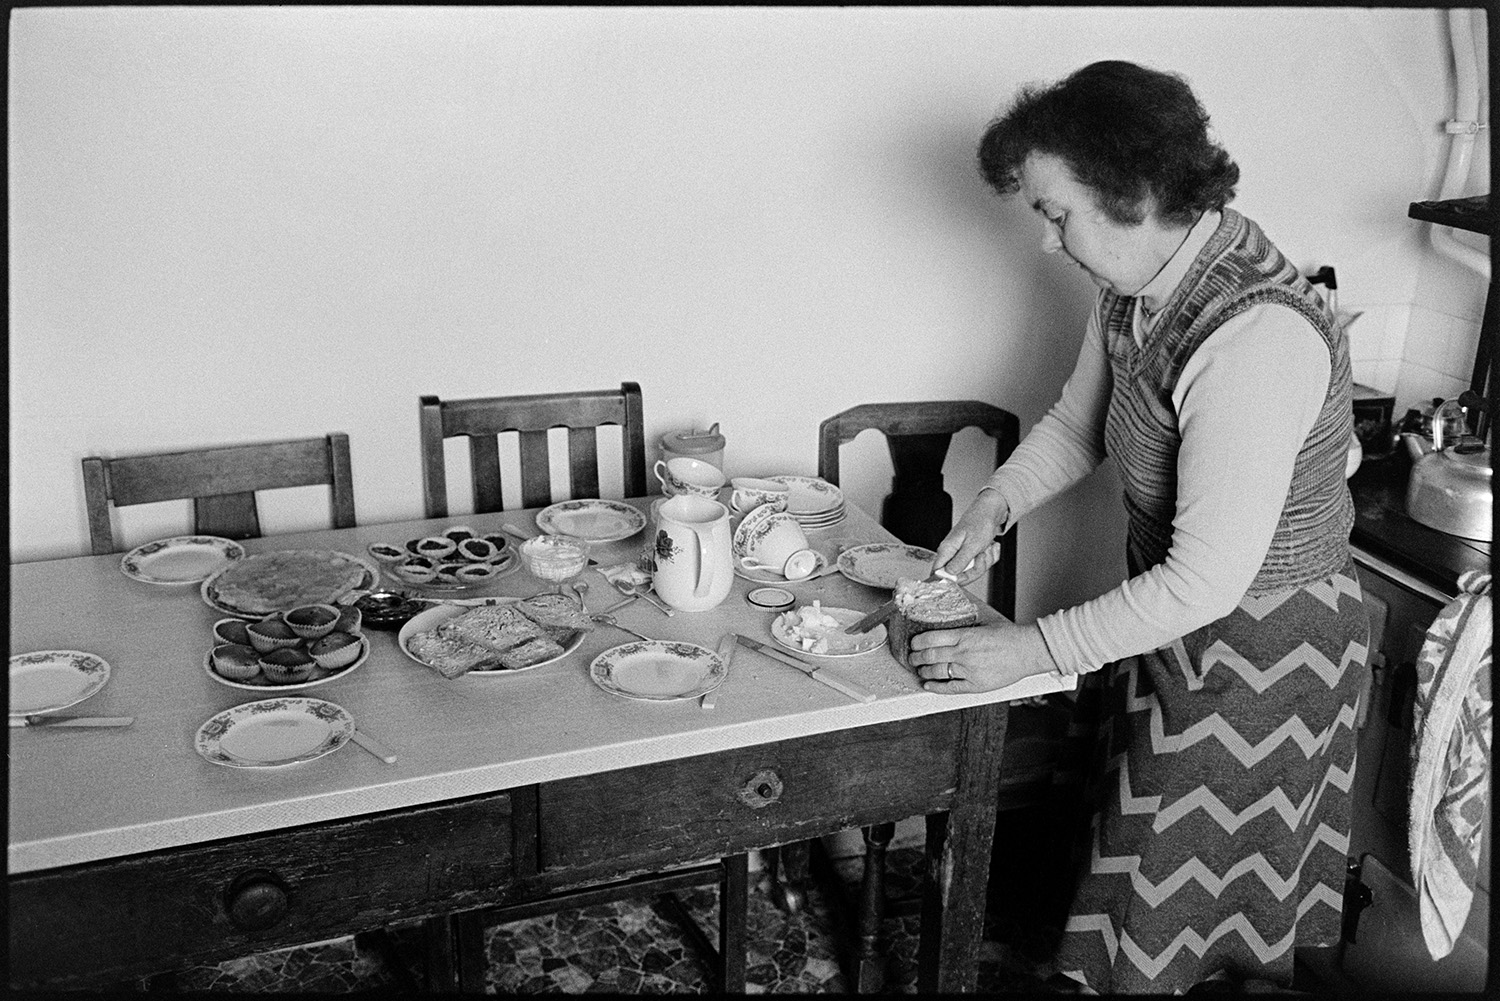 Woman, farmers wife cooking and making tea. 
[Hettie Ward preparing tea in her kitchen at Parsonage, Iddesleigh. The kitchen table is laid with cakes, plates and teacups. Hettie is cutting slices of bread. A kettle can be seen on a rayburn in the background.]